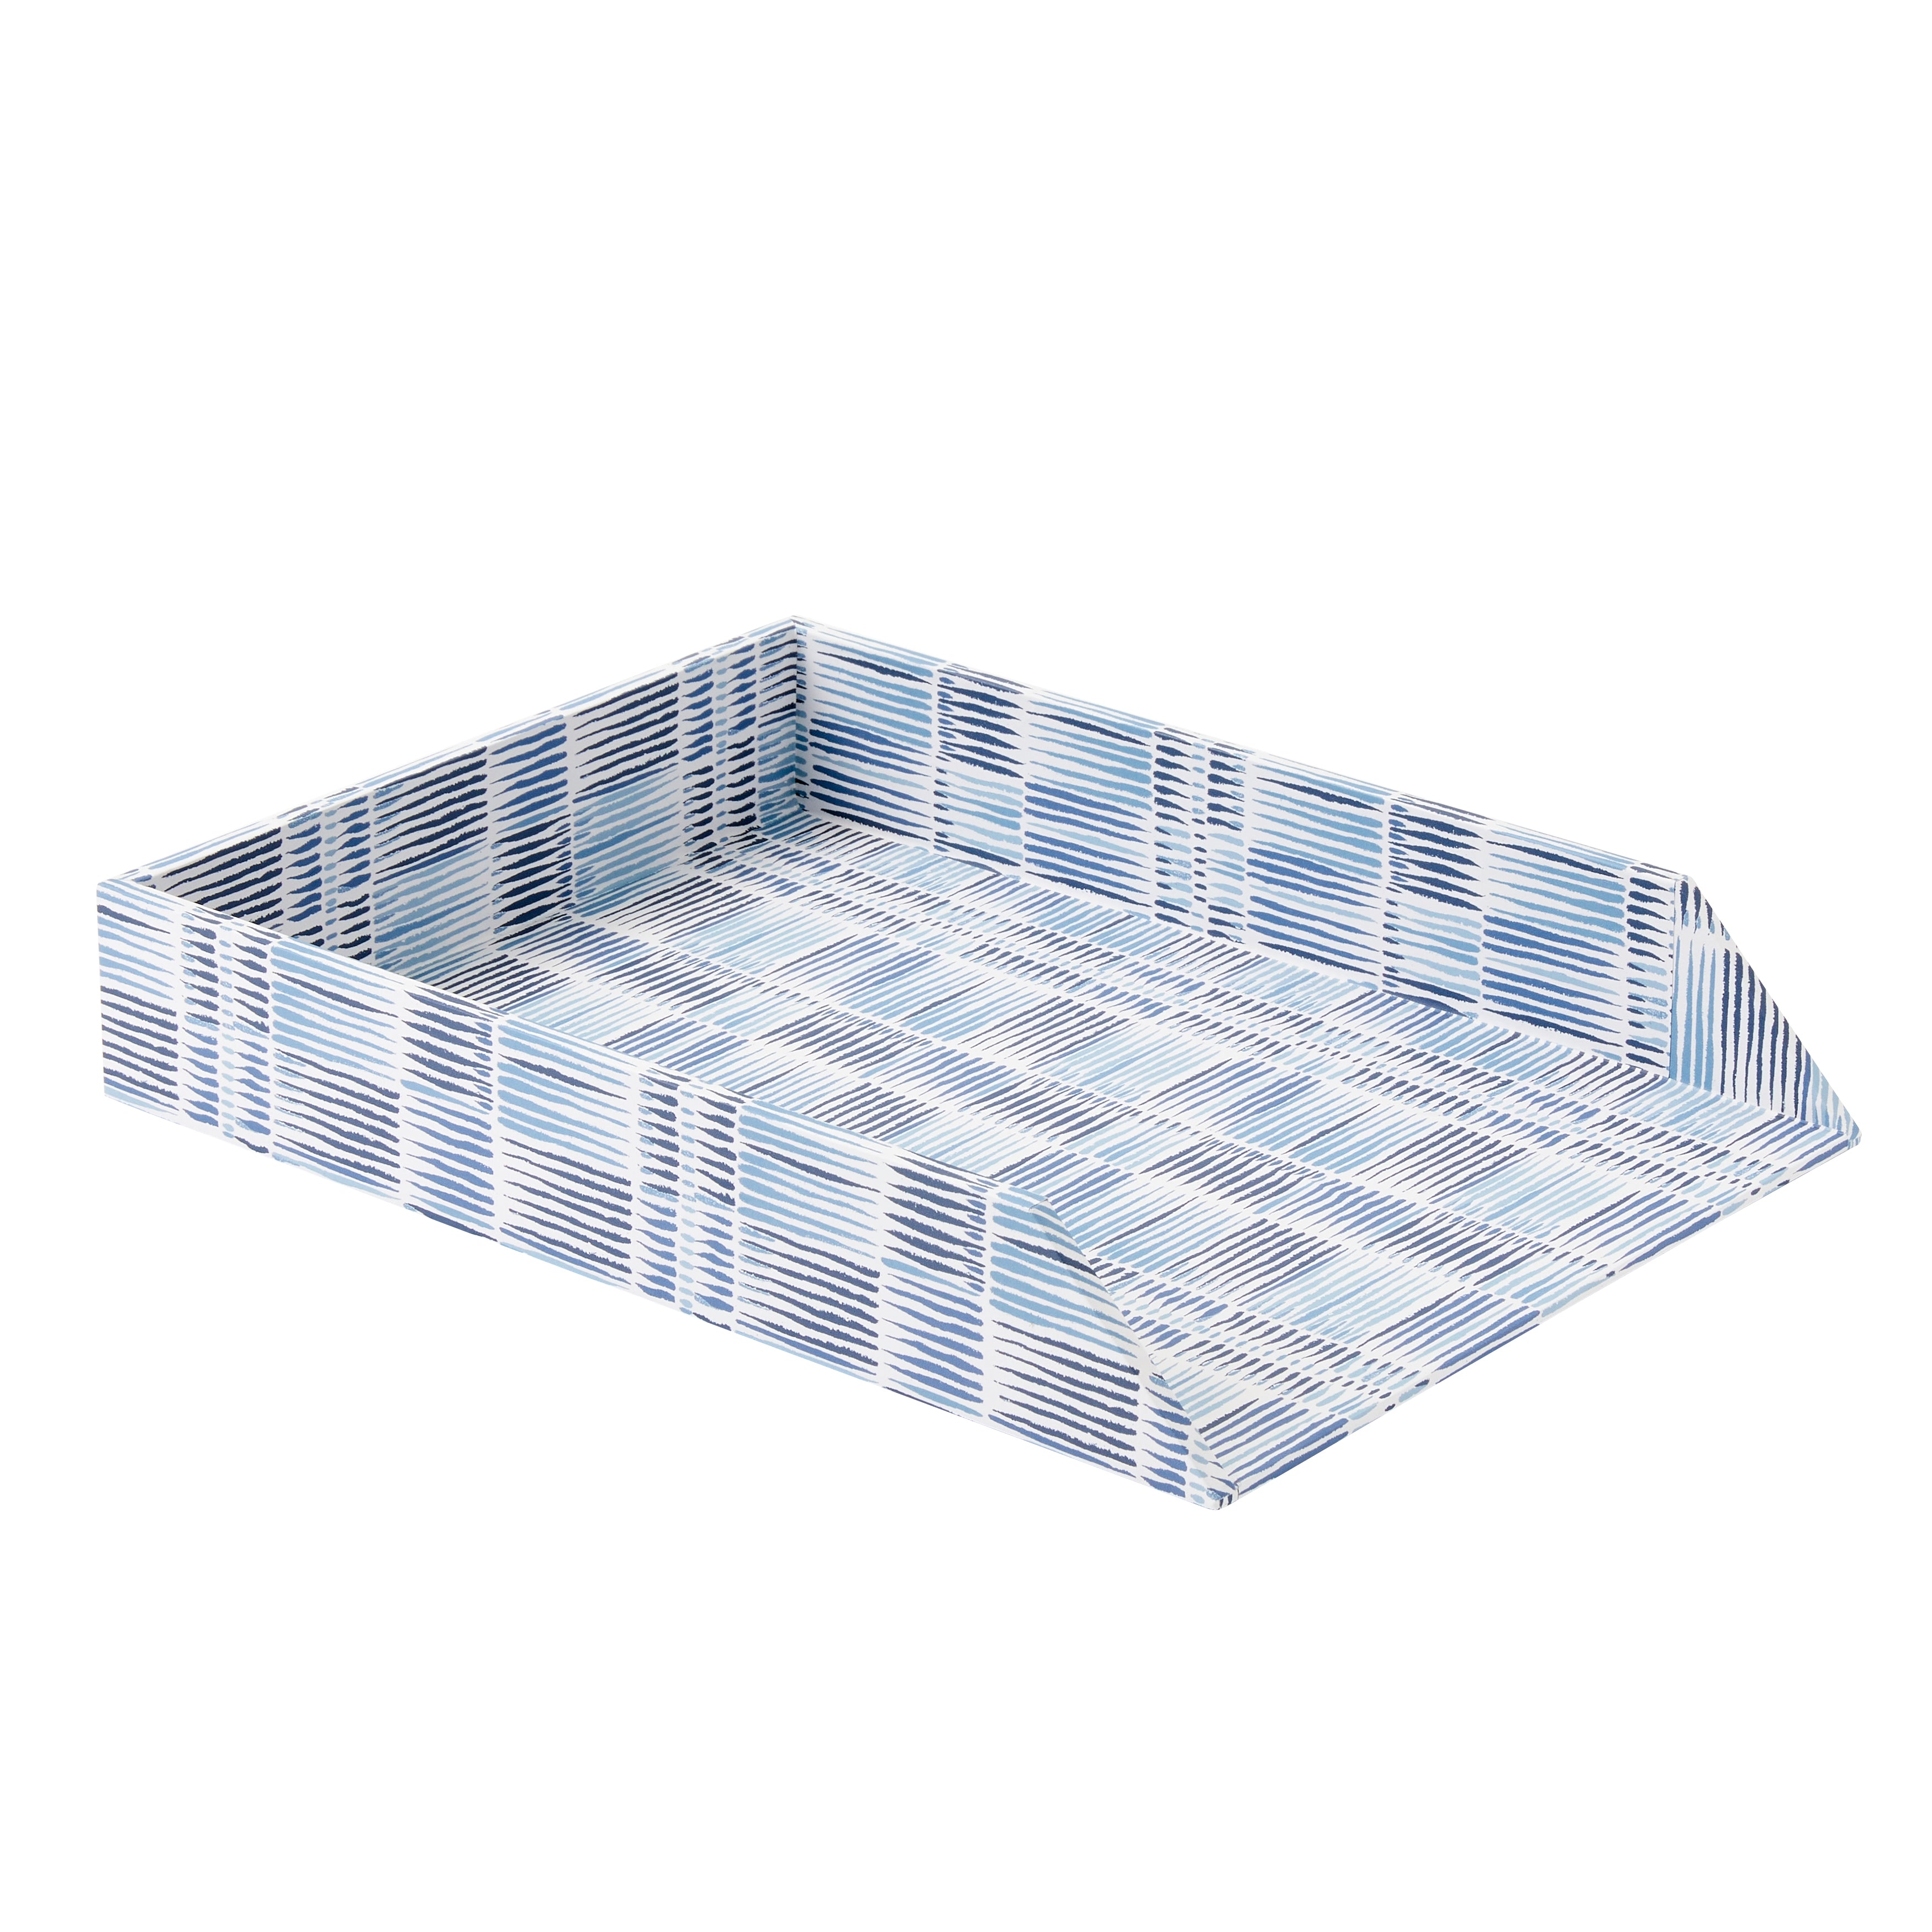 Nina Campbell Letter Tray Old Fort - Blue